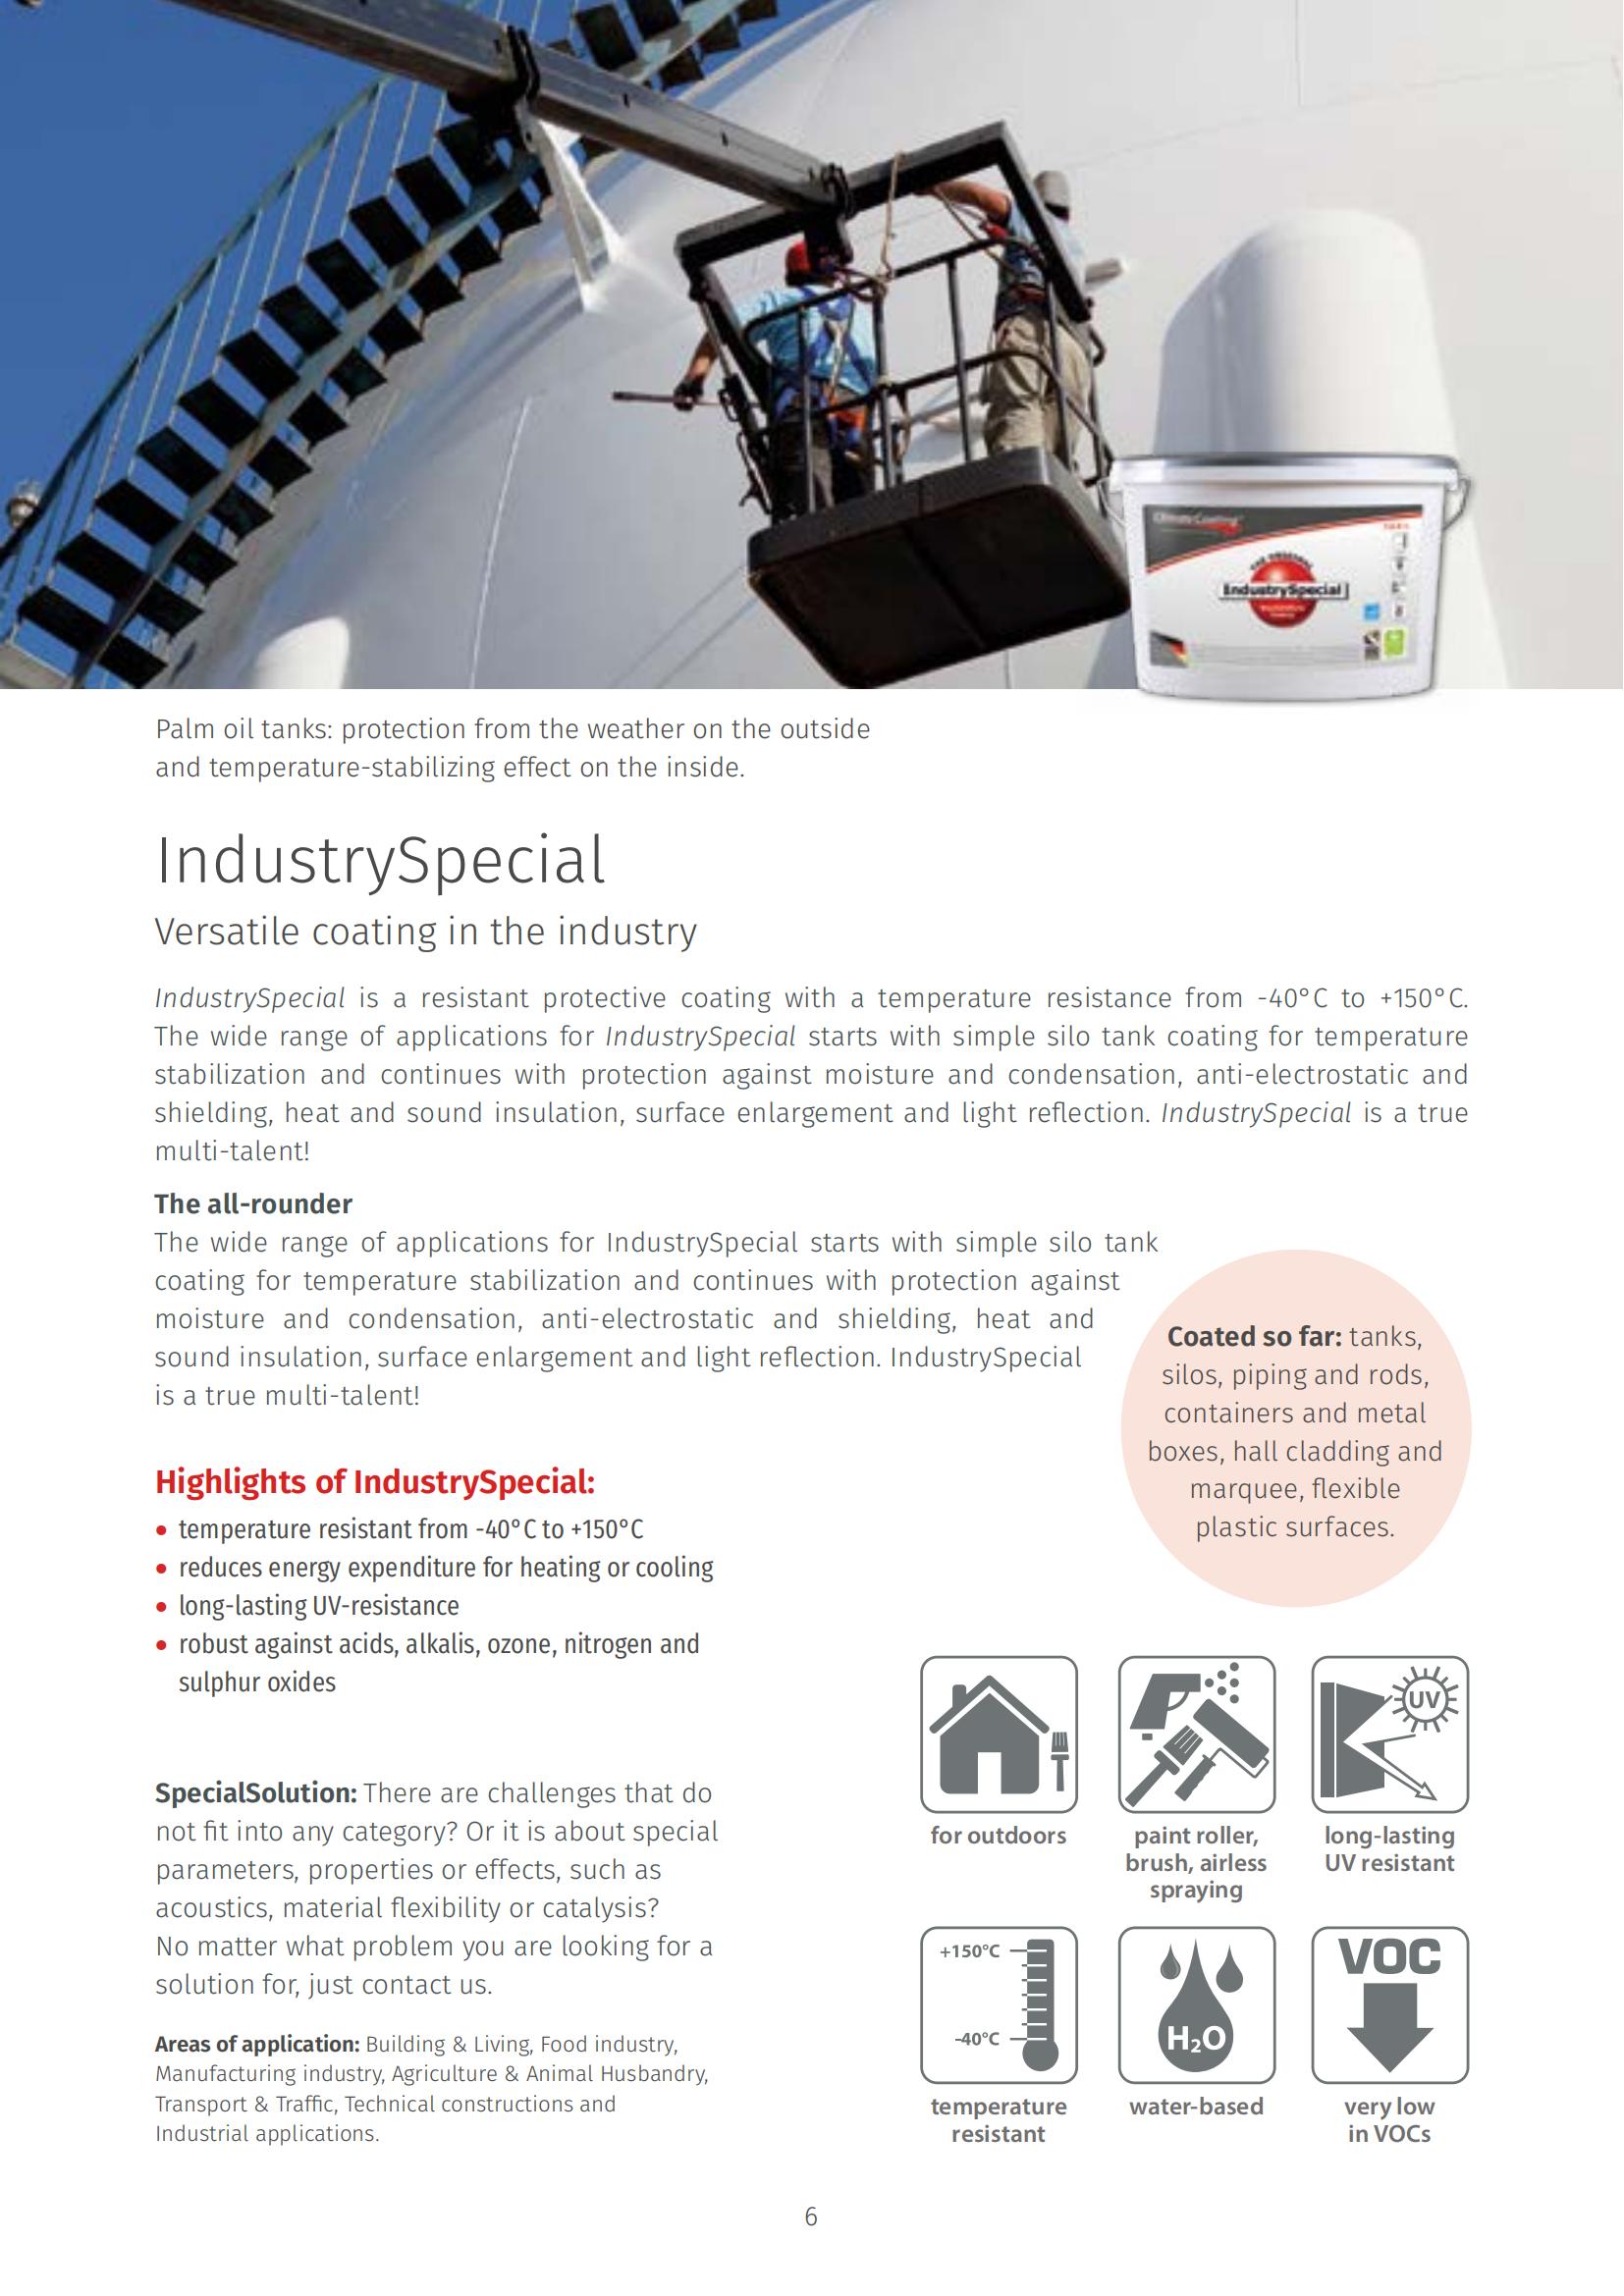 IndustrySpecial Coating | Industrial Coating | Factory Paint